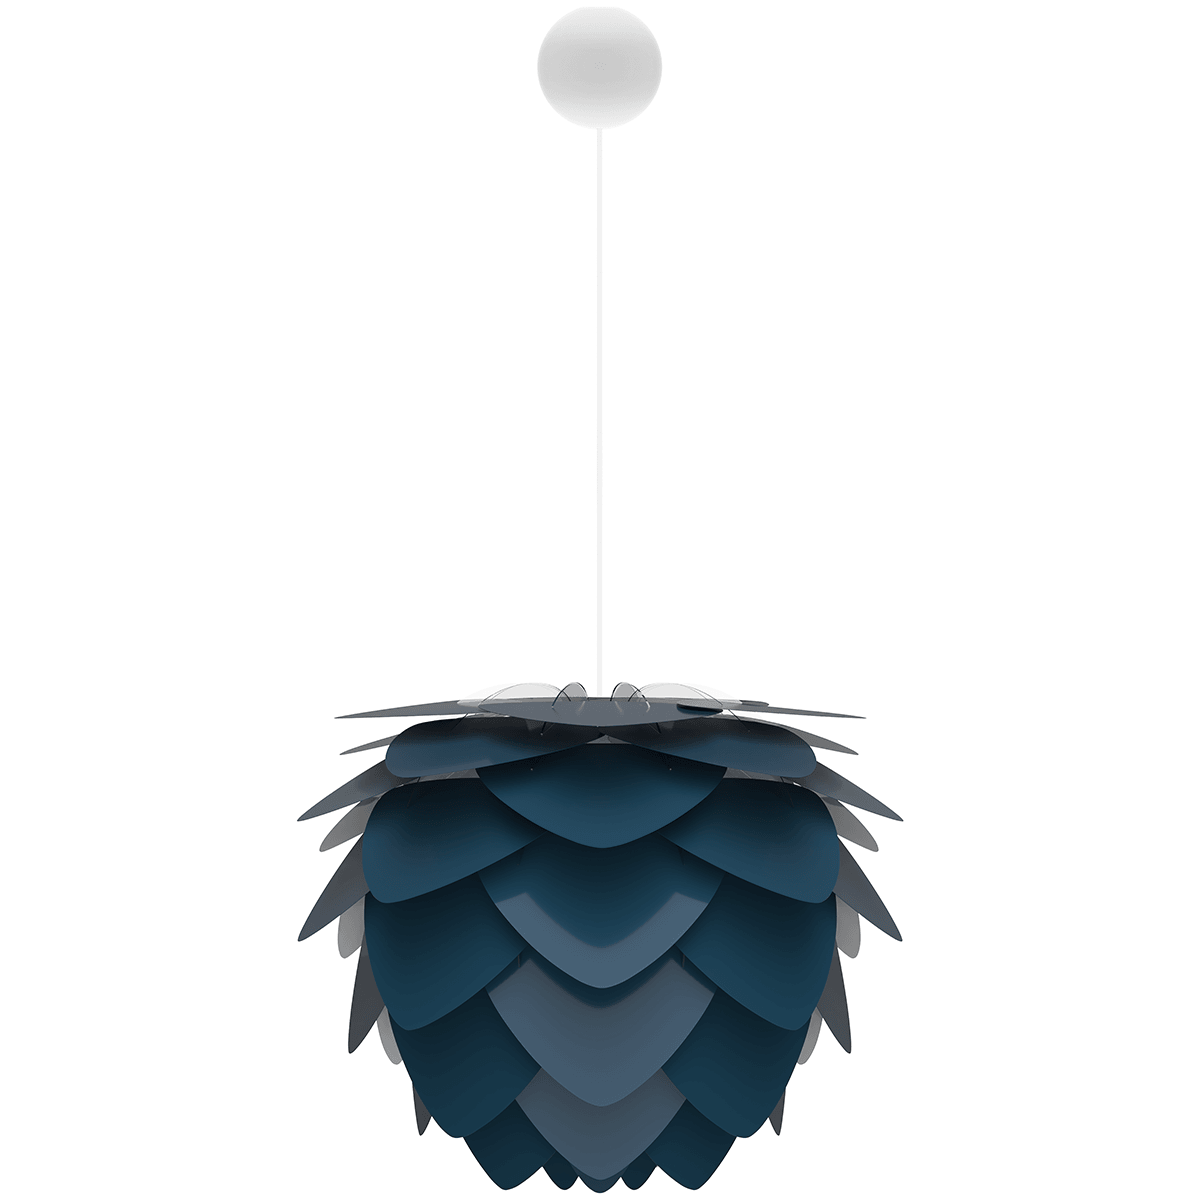 Cannonball Canopy - WOO .Design